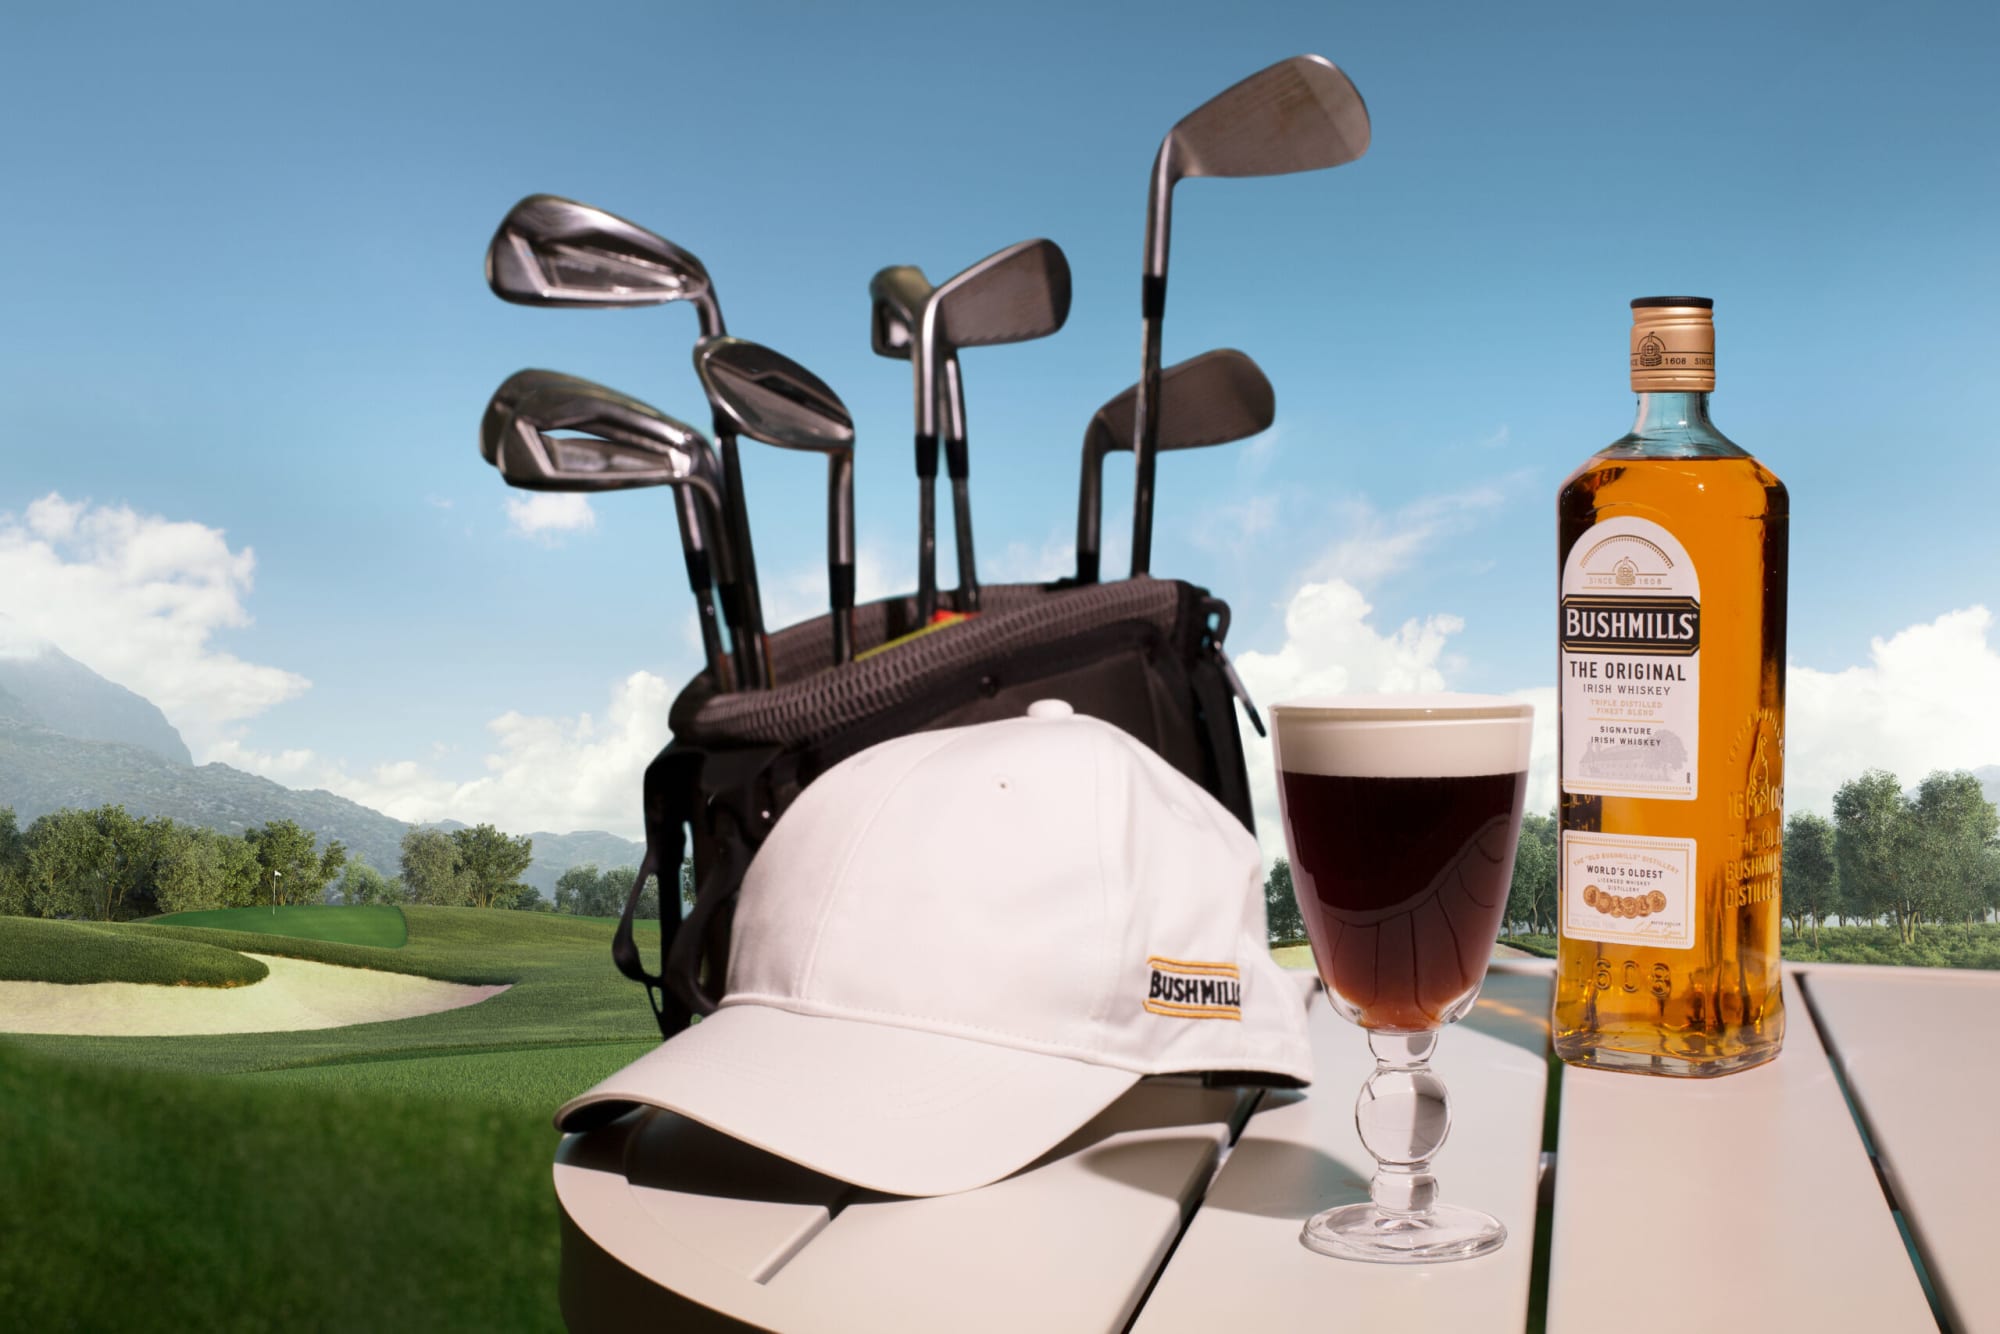 Toast to the PGA with these Bushmills Irish Whiskey golf themed cocktails